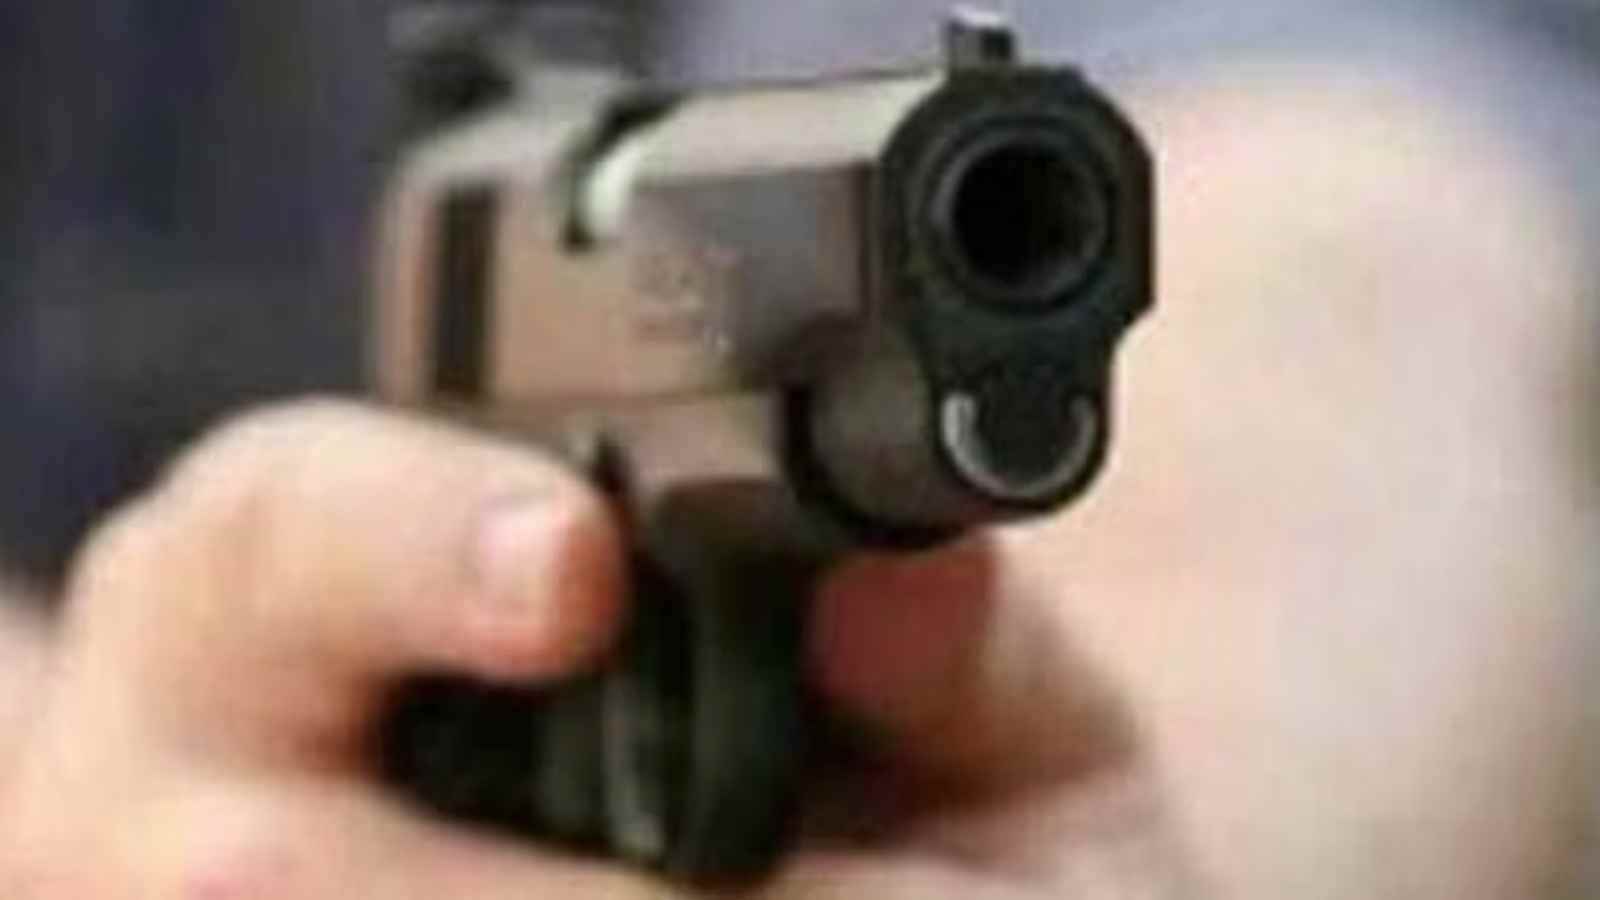 AIMIM leader shot dead in Siwan, police form SIT | India News